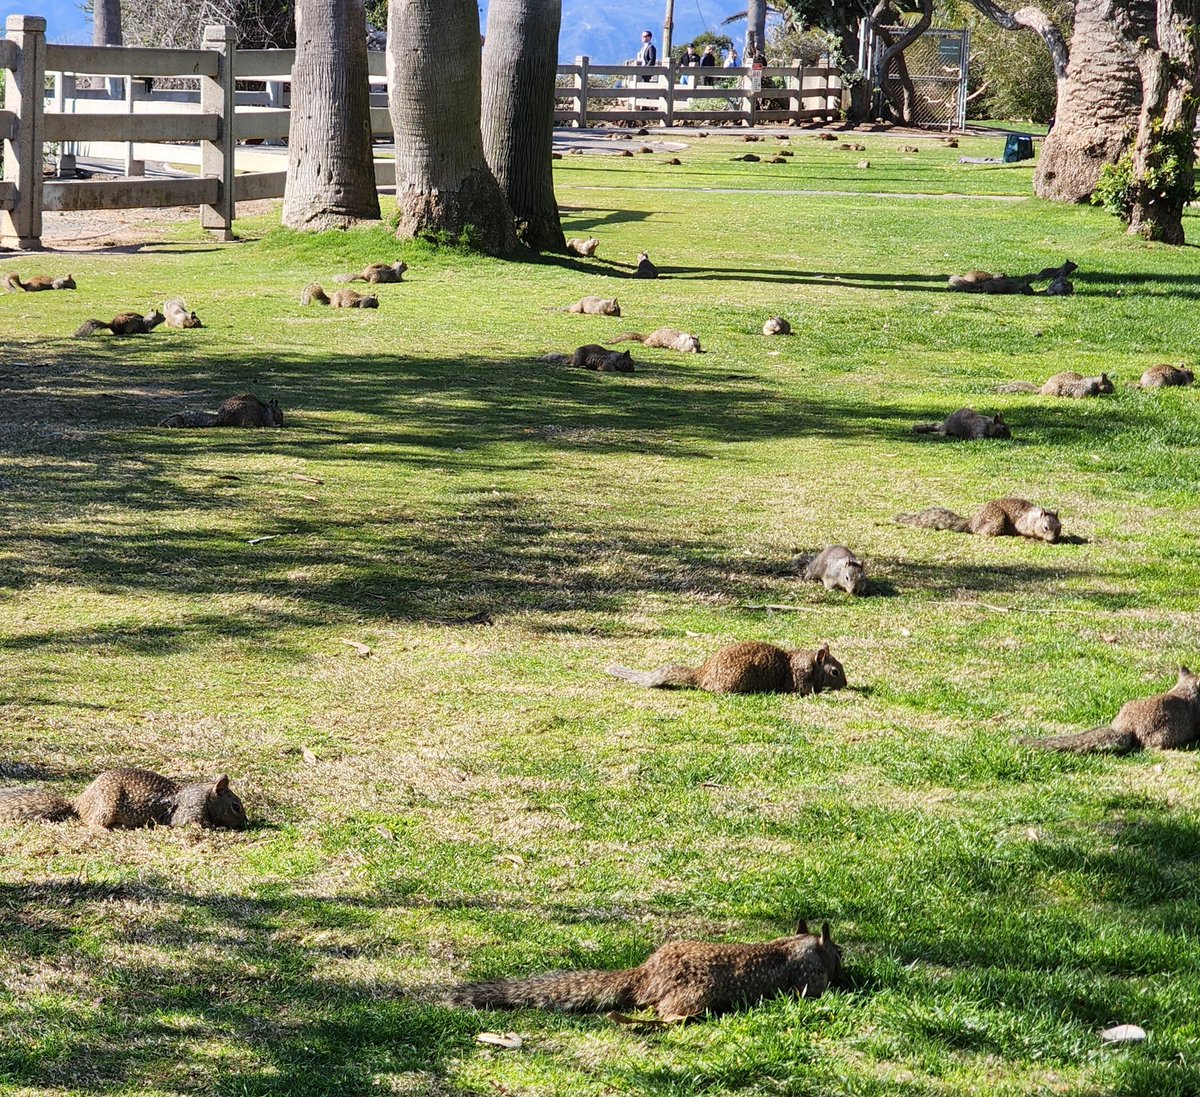 Does Santa Monica have a squirrel problem? The amount I saw today in Palisades Park seems extreme. It wasn't just this spot near Arizona St. They are everywhere.